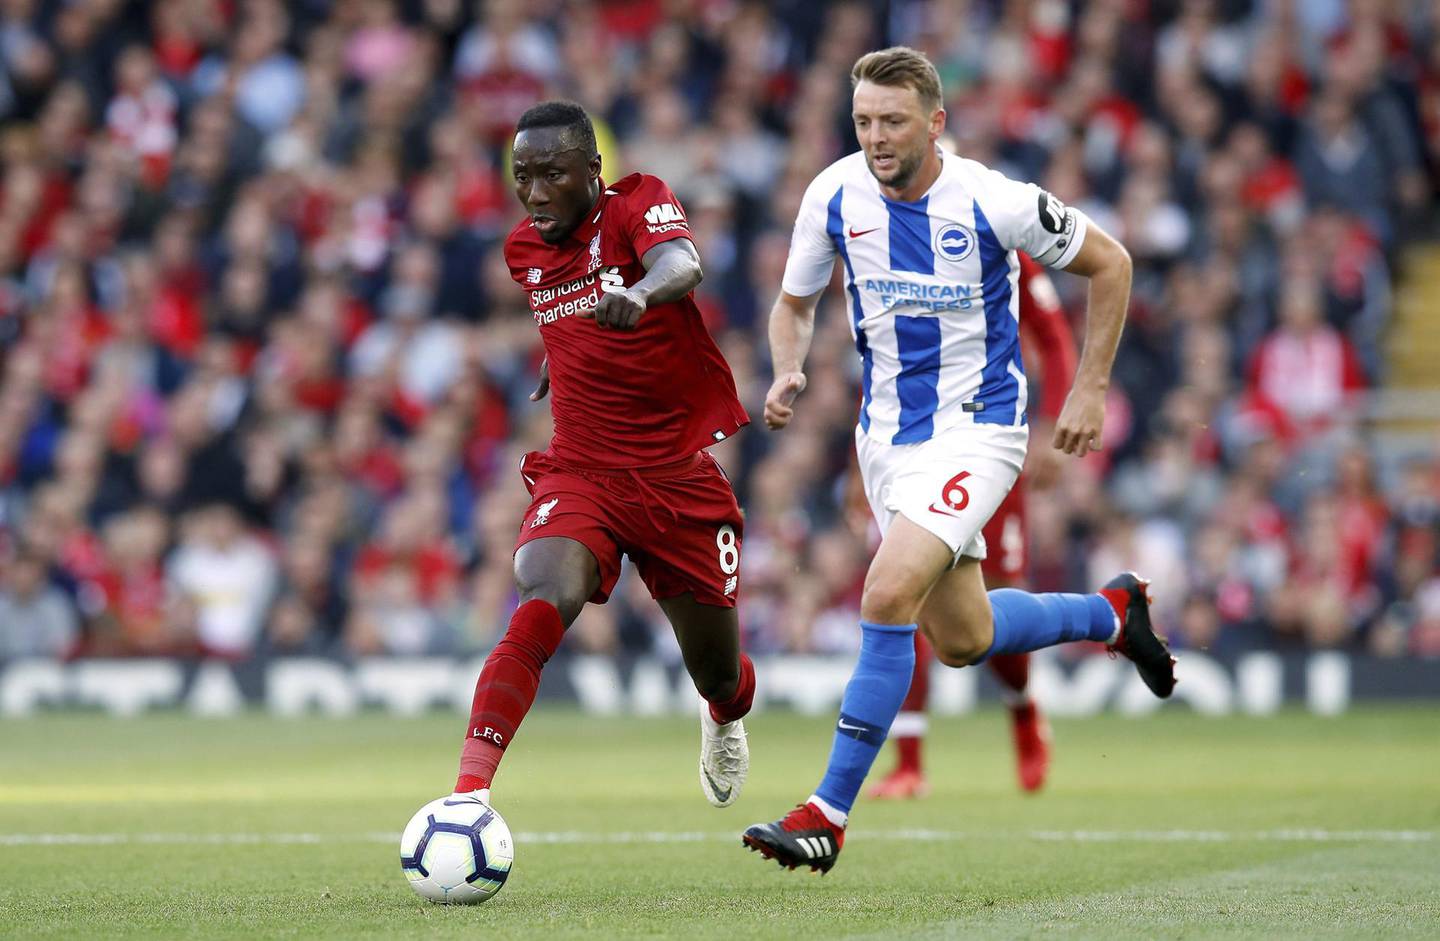 Liverpool's Naby Keita, left and Brighton's Dale Stephens vie for the ball, during the English Premier League soccer match between Liverpool and Brighton,  at Anfield, in Liverpool, England, Saturday, Aug. 25, 2018. (Martin Rickett/PA via AP)